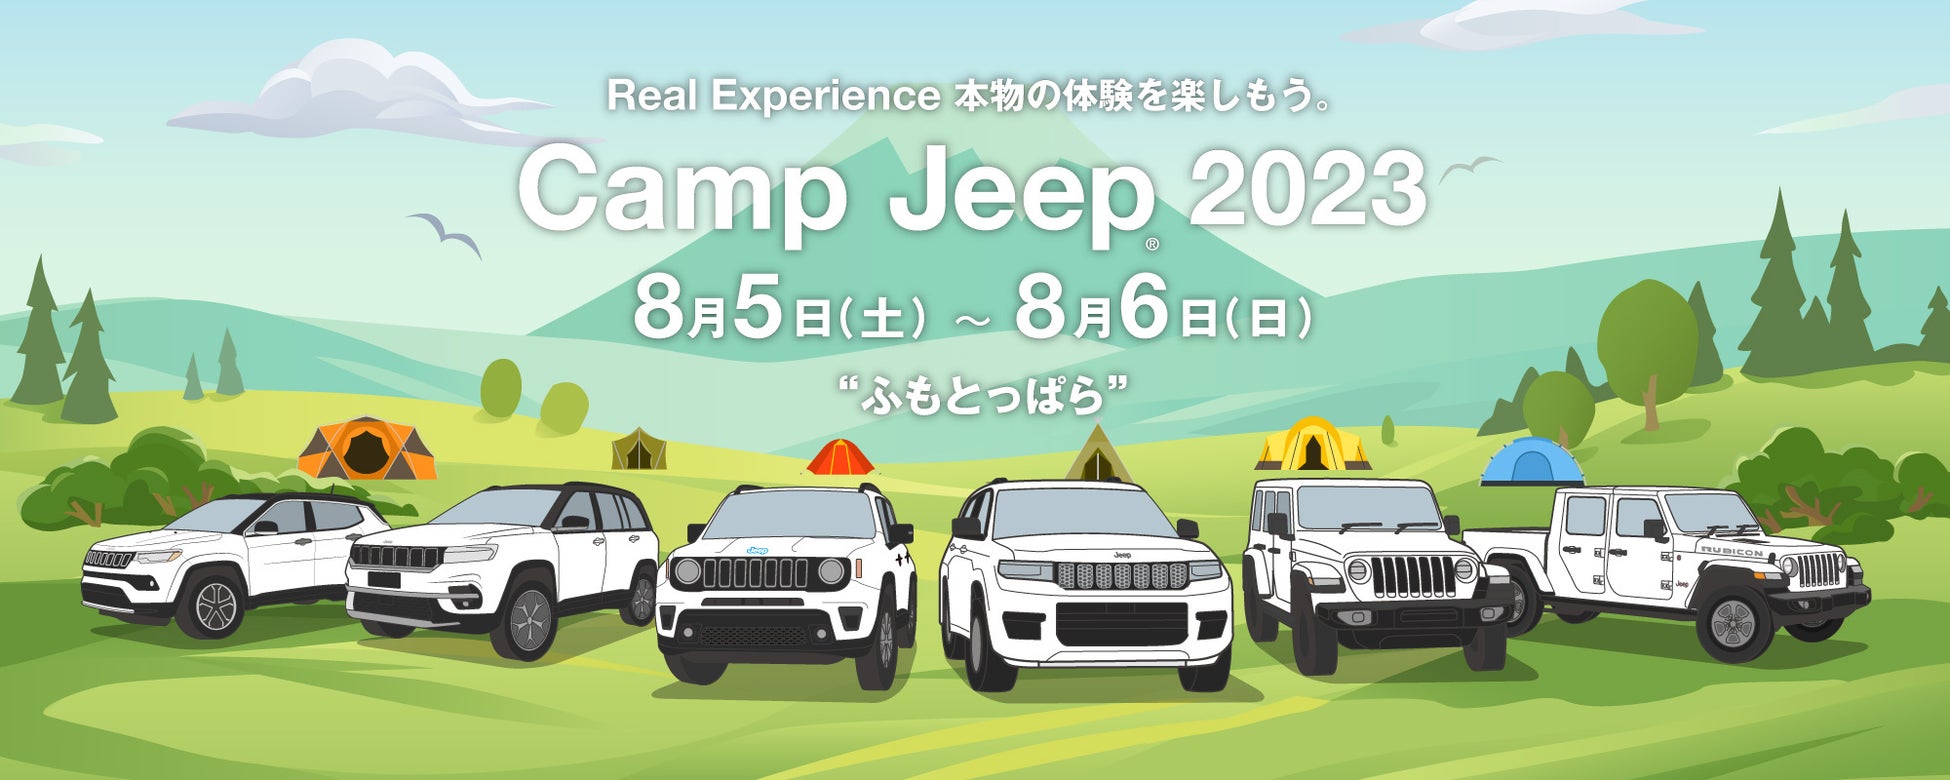 Jeep Real Experience 本物の体験を楽しもう「Camp Jeep 2023 with Feel EARTH × 学びの森」を開催のサブ画像1